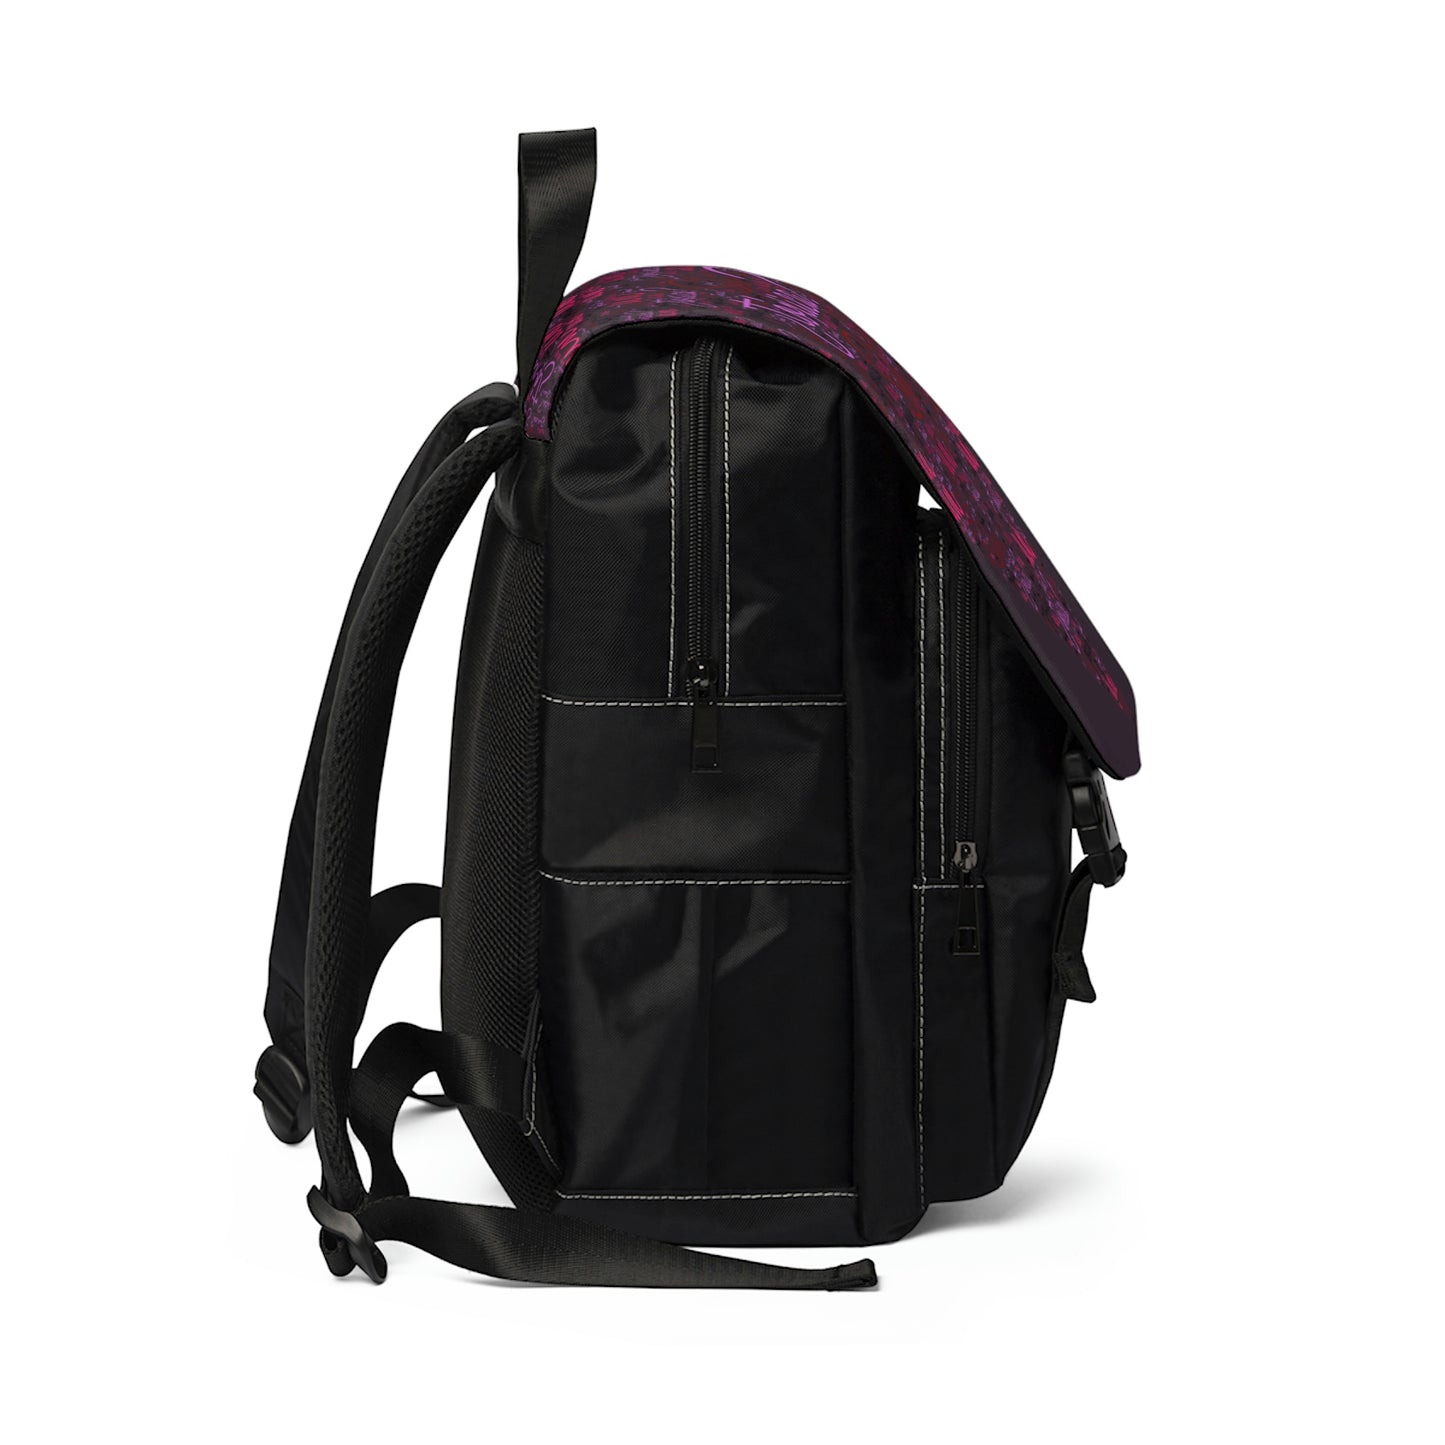 Travel backpack "Toxica"